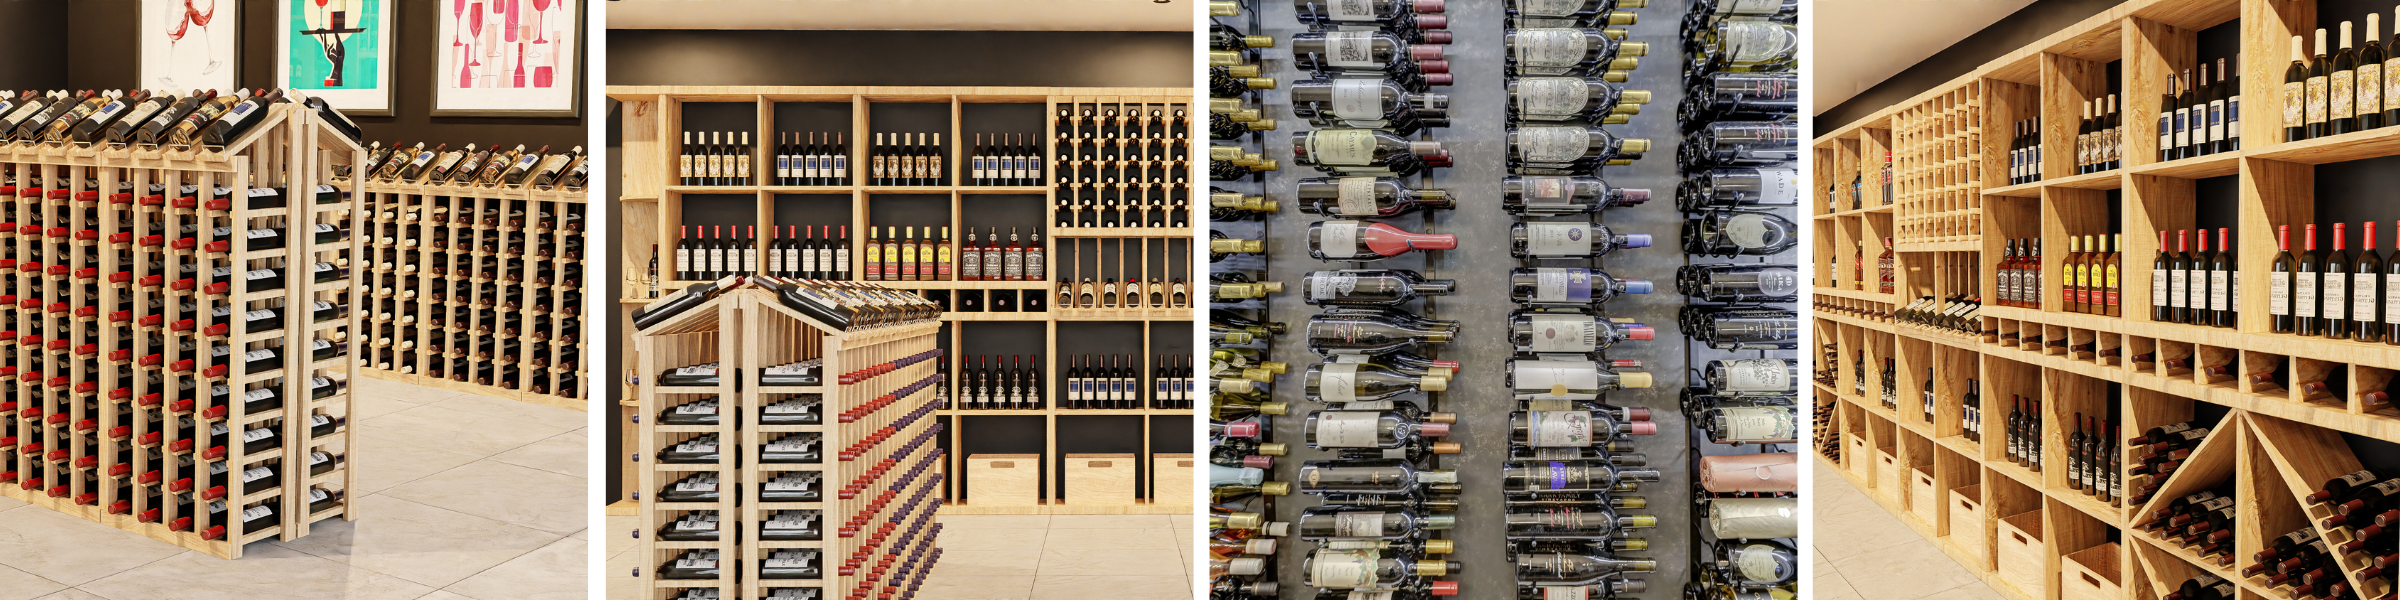 5 Tips for Building a Retail Wine Cellar